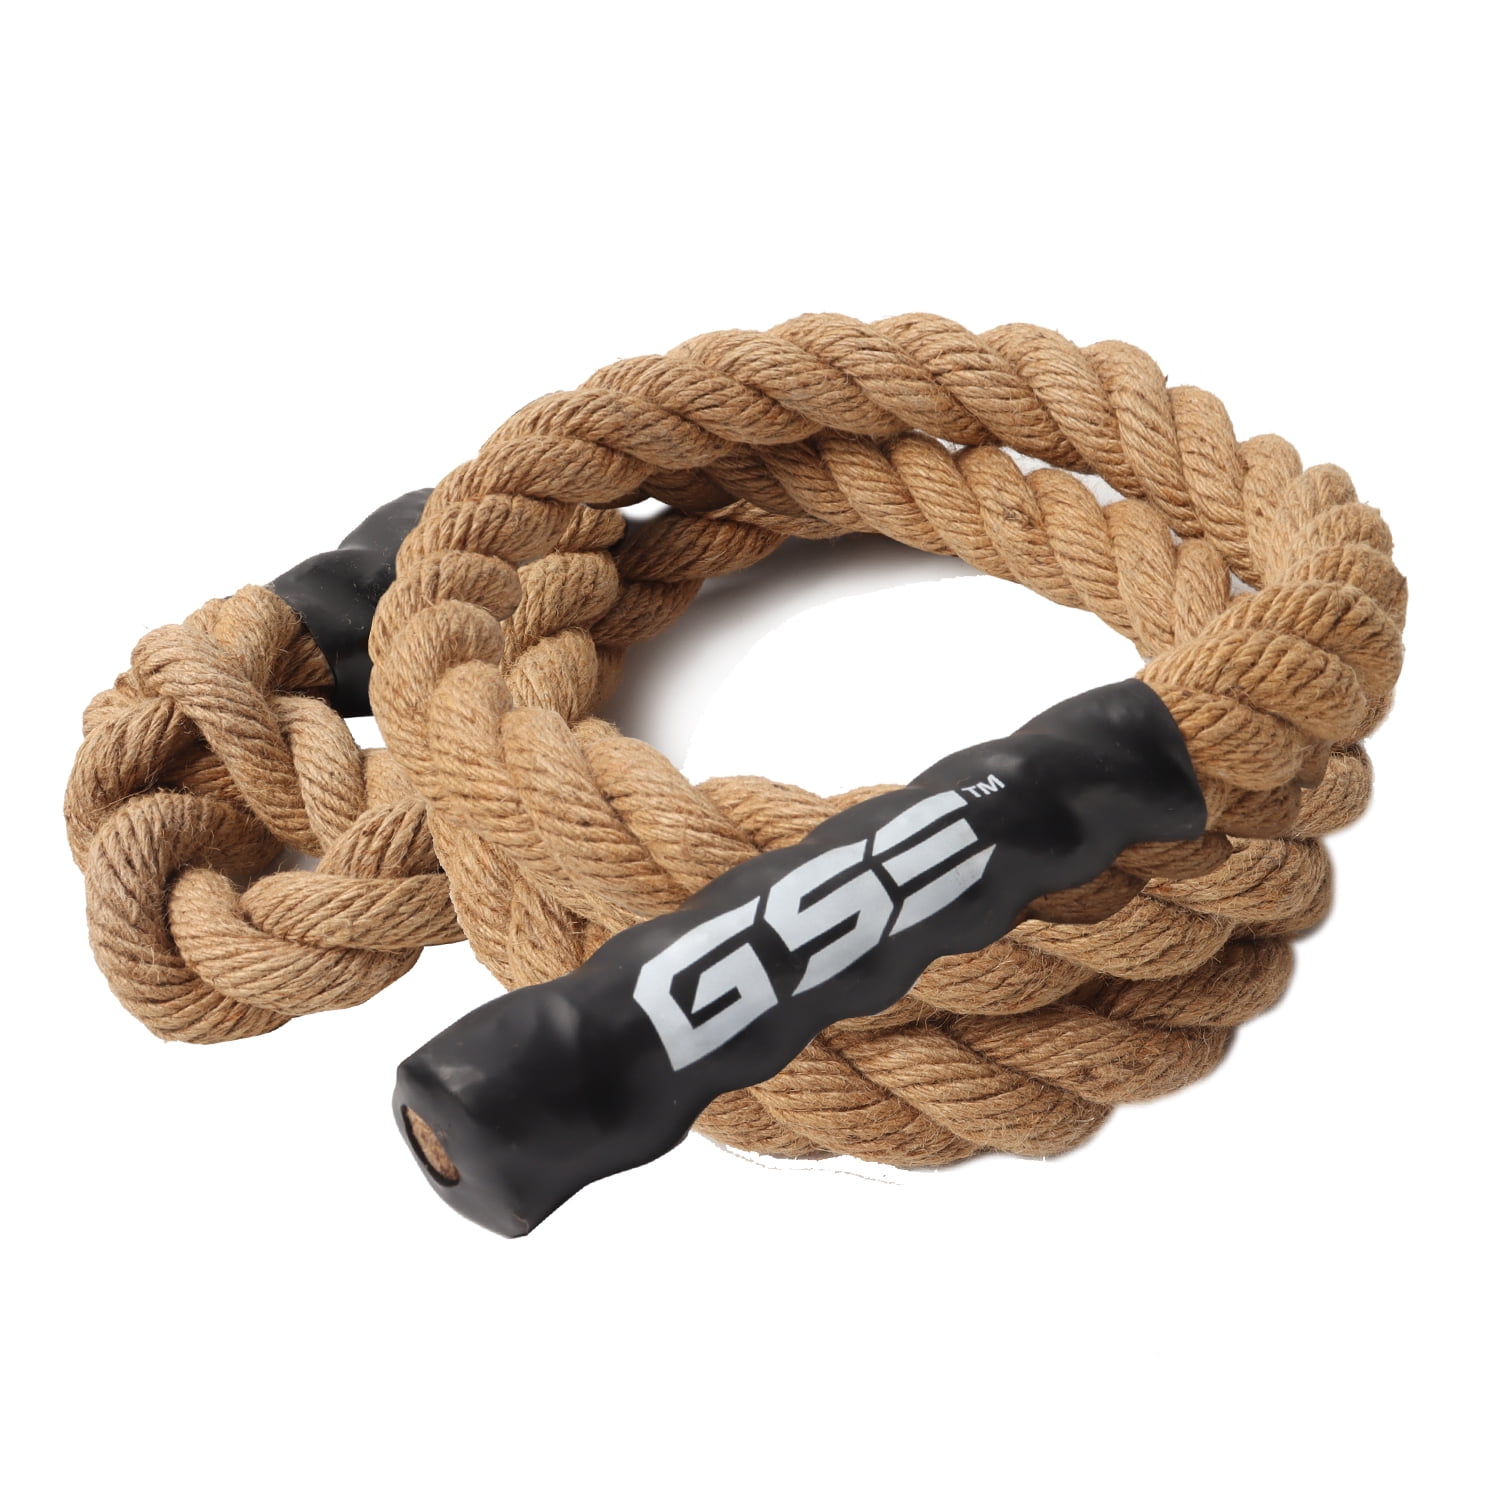 GSE Games & Sports Expert Sisal Gym Fitness Training Rope. 1.5 Battle  Climbing Rope Workout Rope for Climbing Exercises, Strength Training